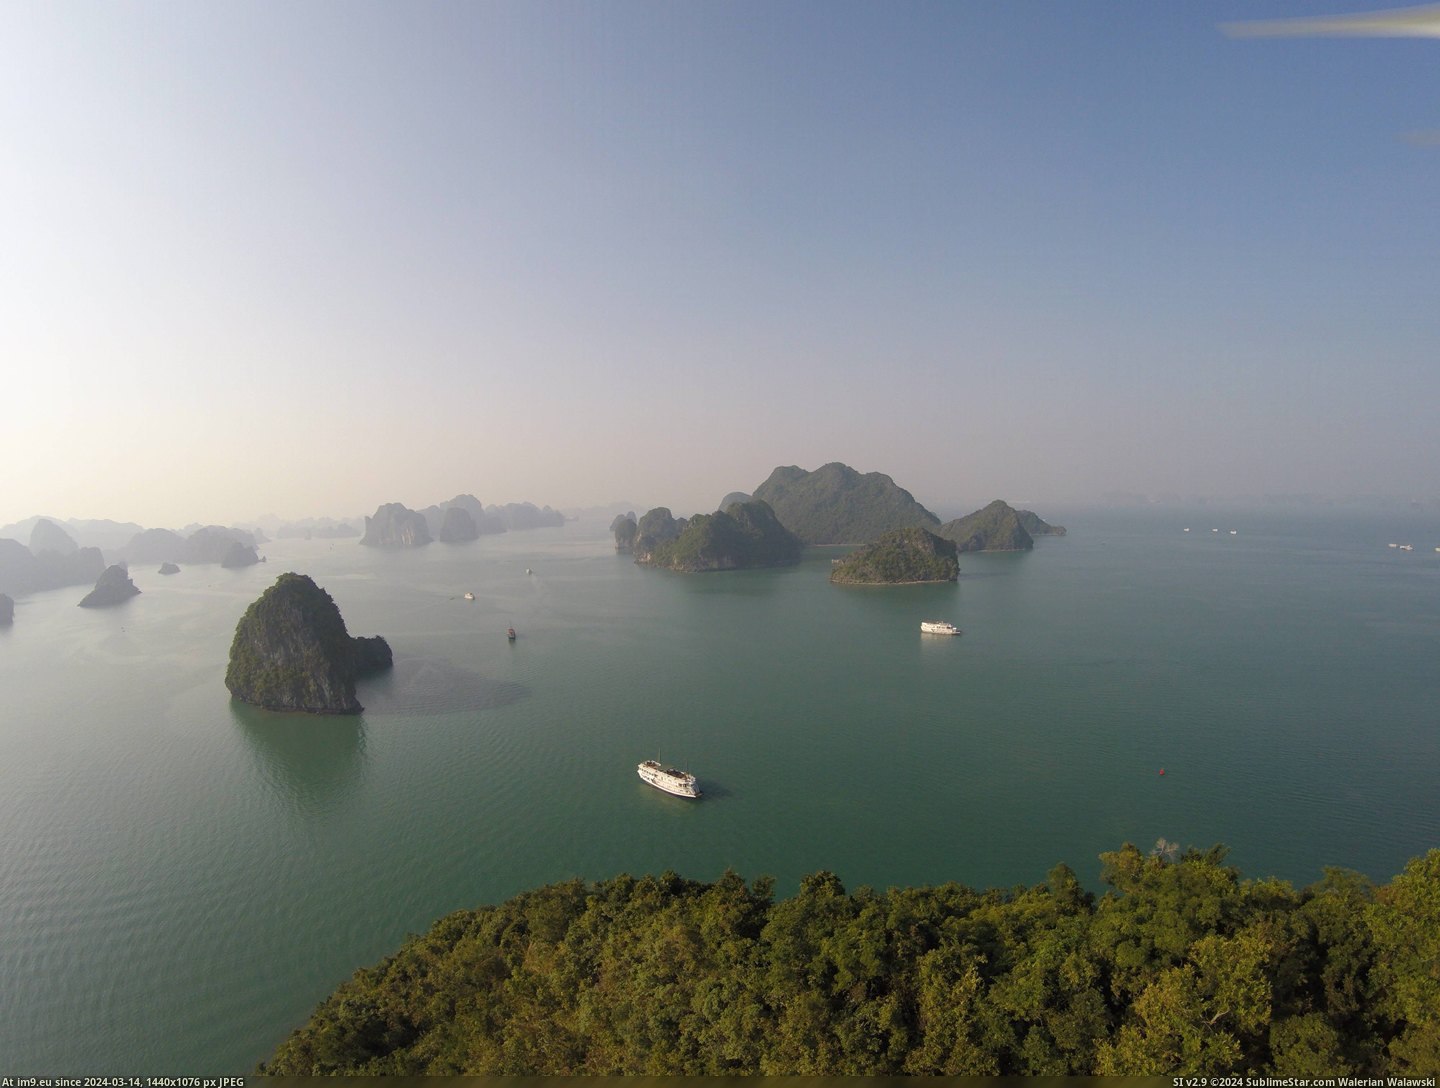 #Lost #Gorgeous #Result #Vietnam #Drone #Bay #4000x3000 #Control [Earthporn] Lost control of my drone in Halong Bay in Vietnam, the result was gorgeous [4000x3000] Pic. (Image of album My r/EARTHPORN favs))